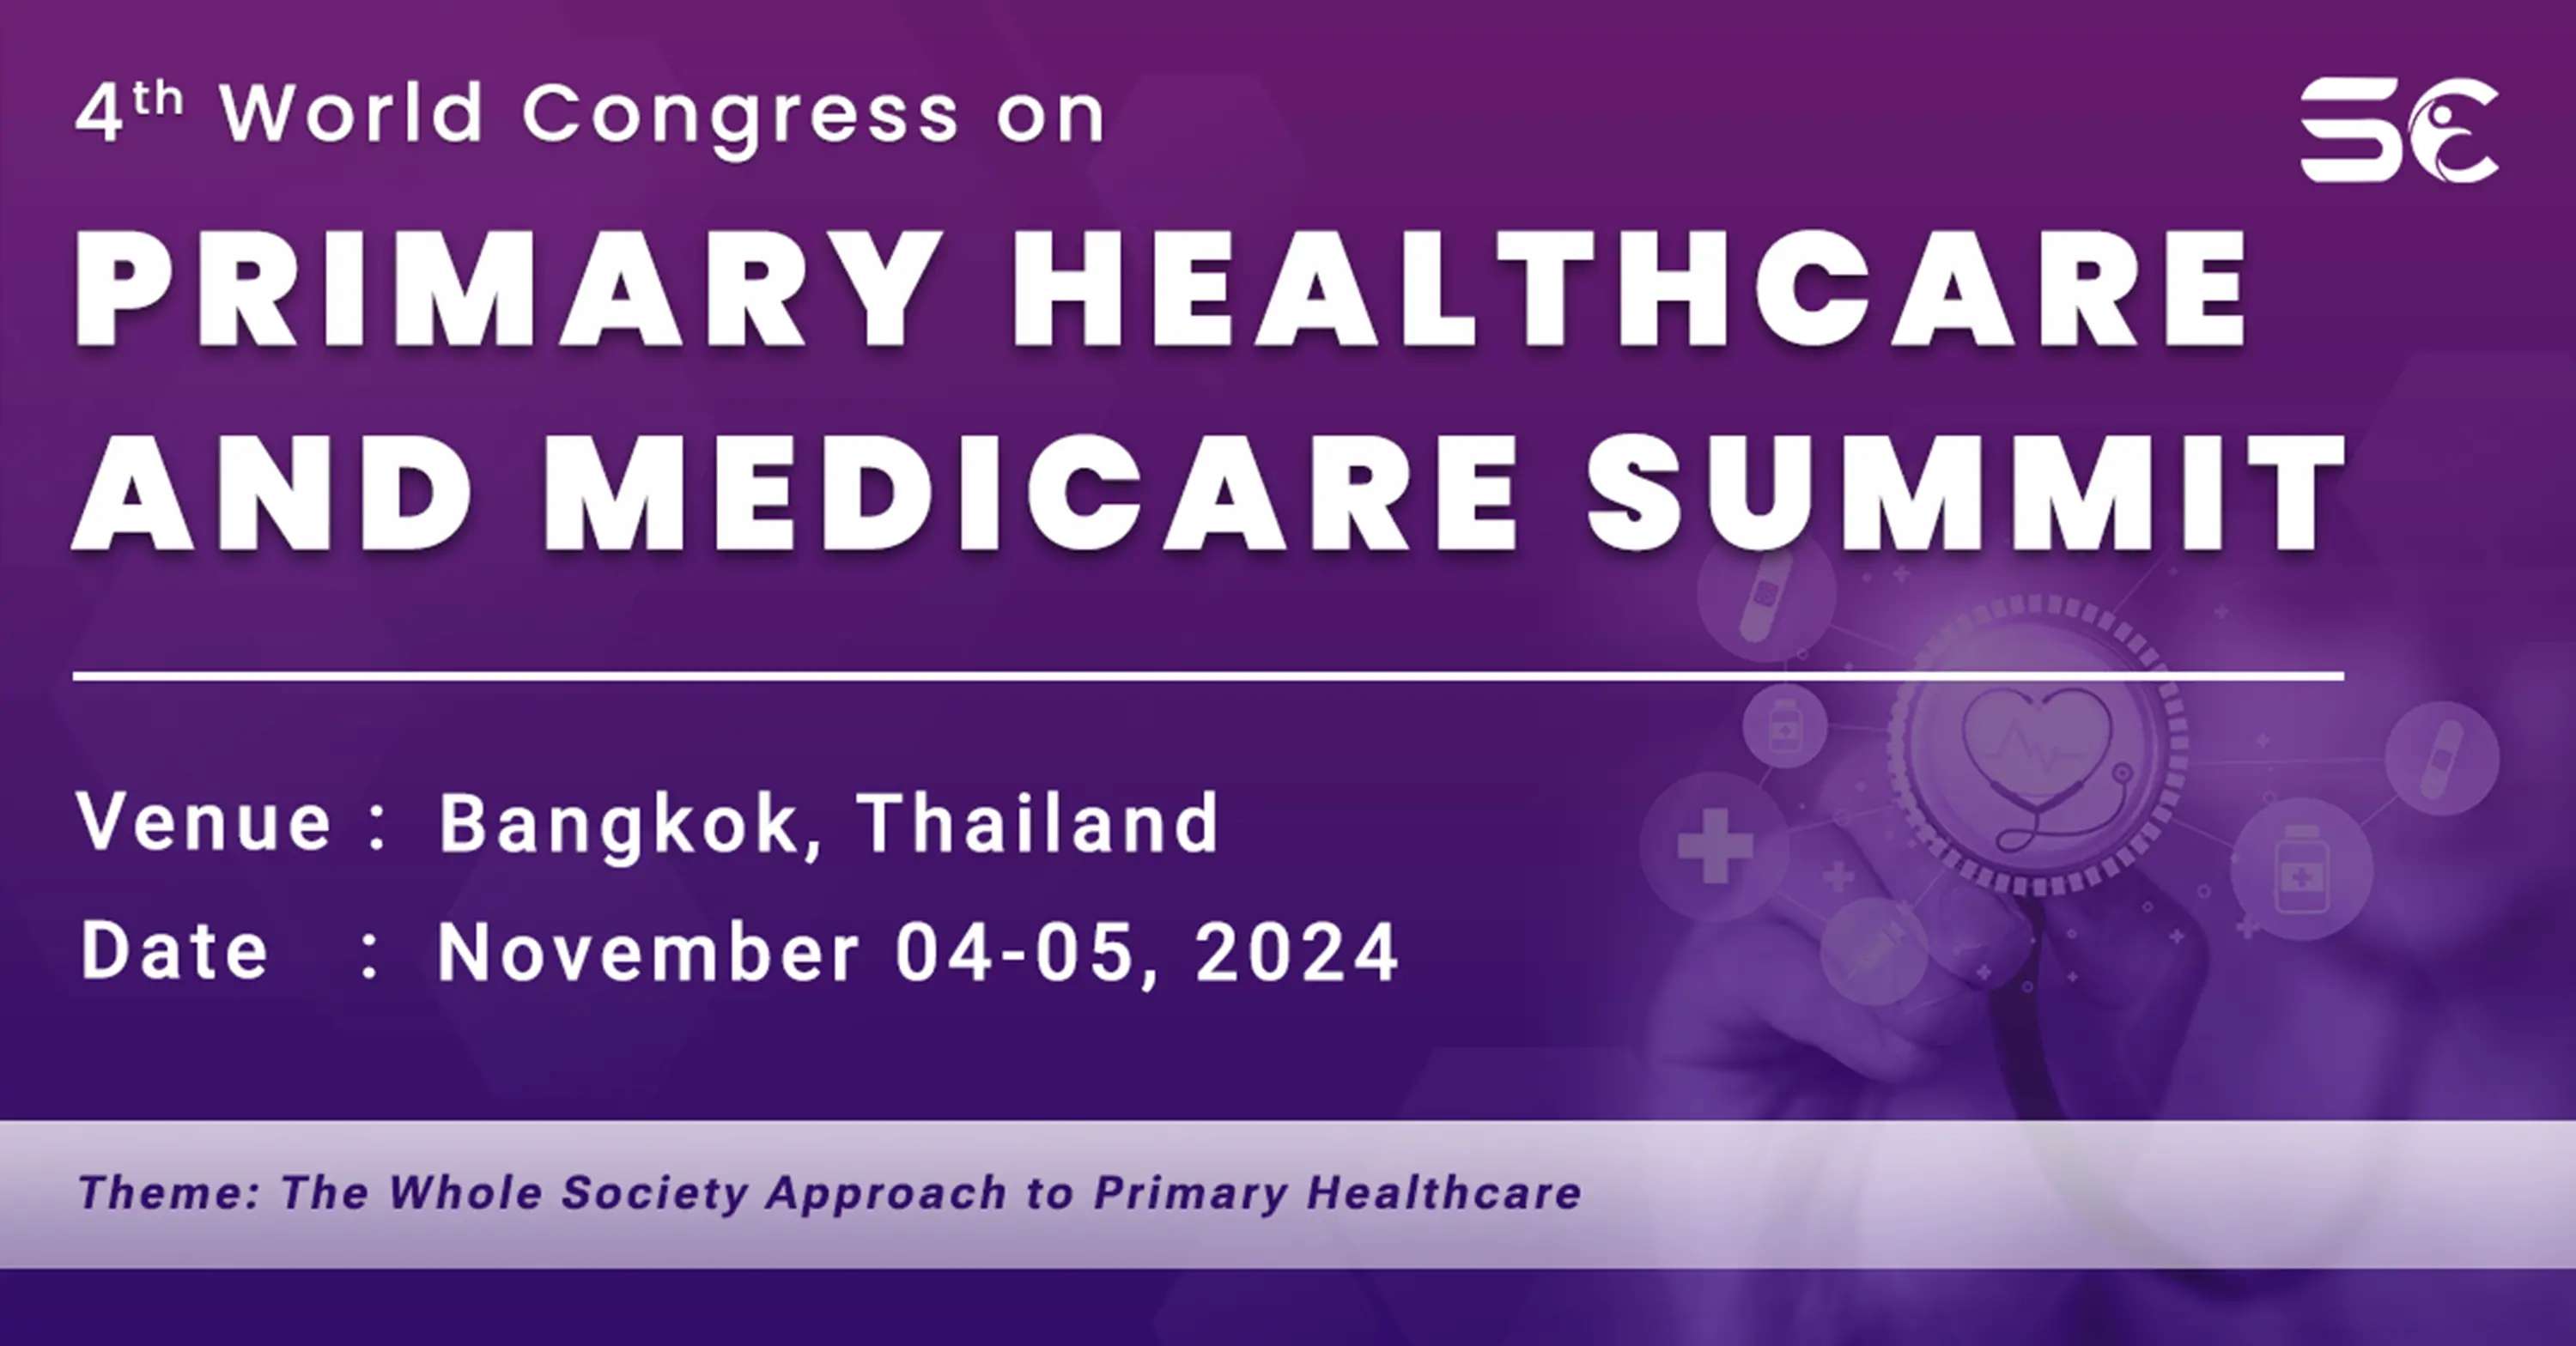 4th World Congress on Primary Healthcare and Medicare Summit